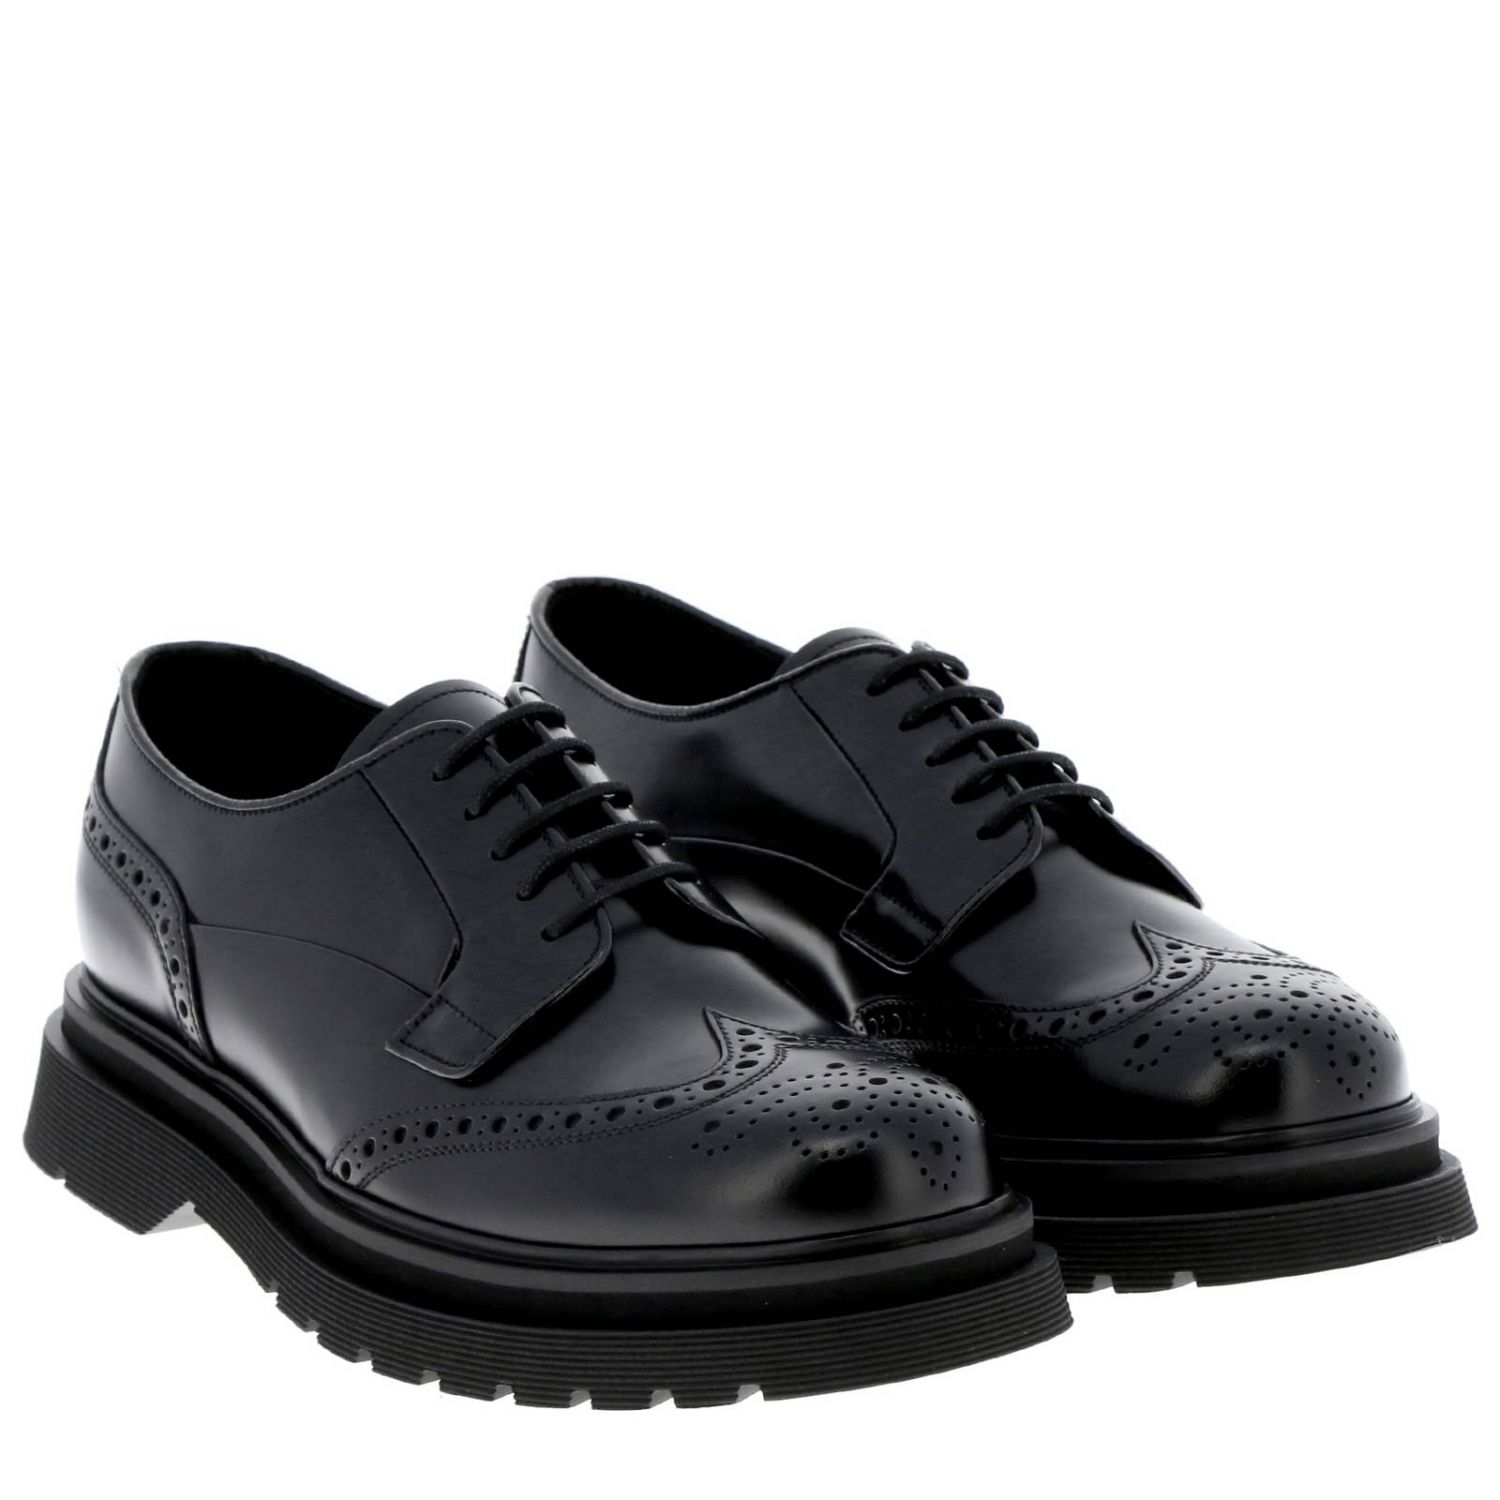 Brogue shoes Prada: Prada derby shoes in brushed leather black 2